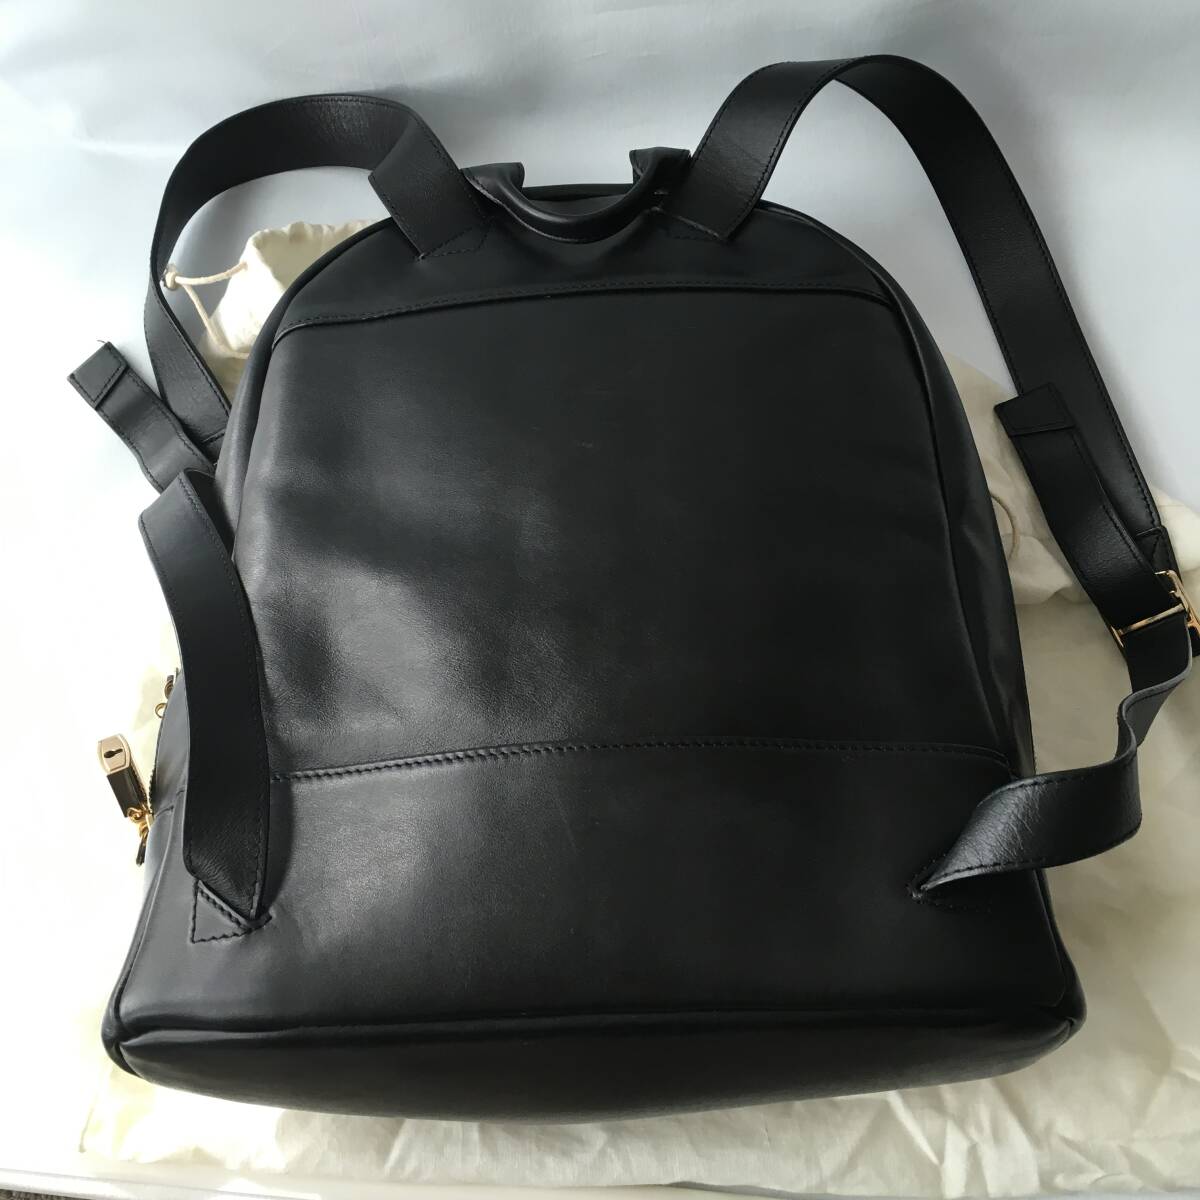  ultimate beautiful goods WANT LES ESSENTIELSwonto less Esse n car ru leather rucksack backpack 